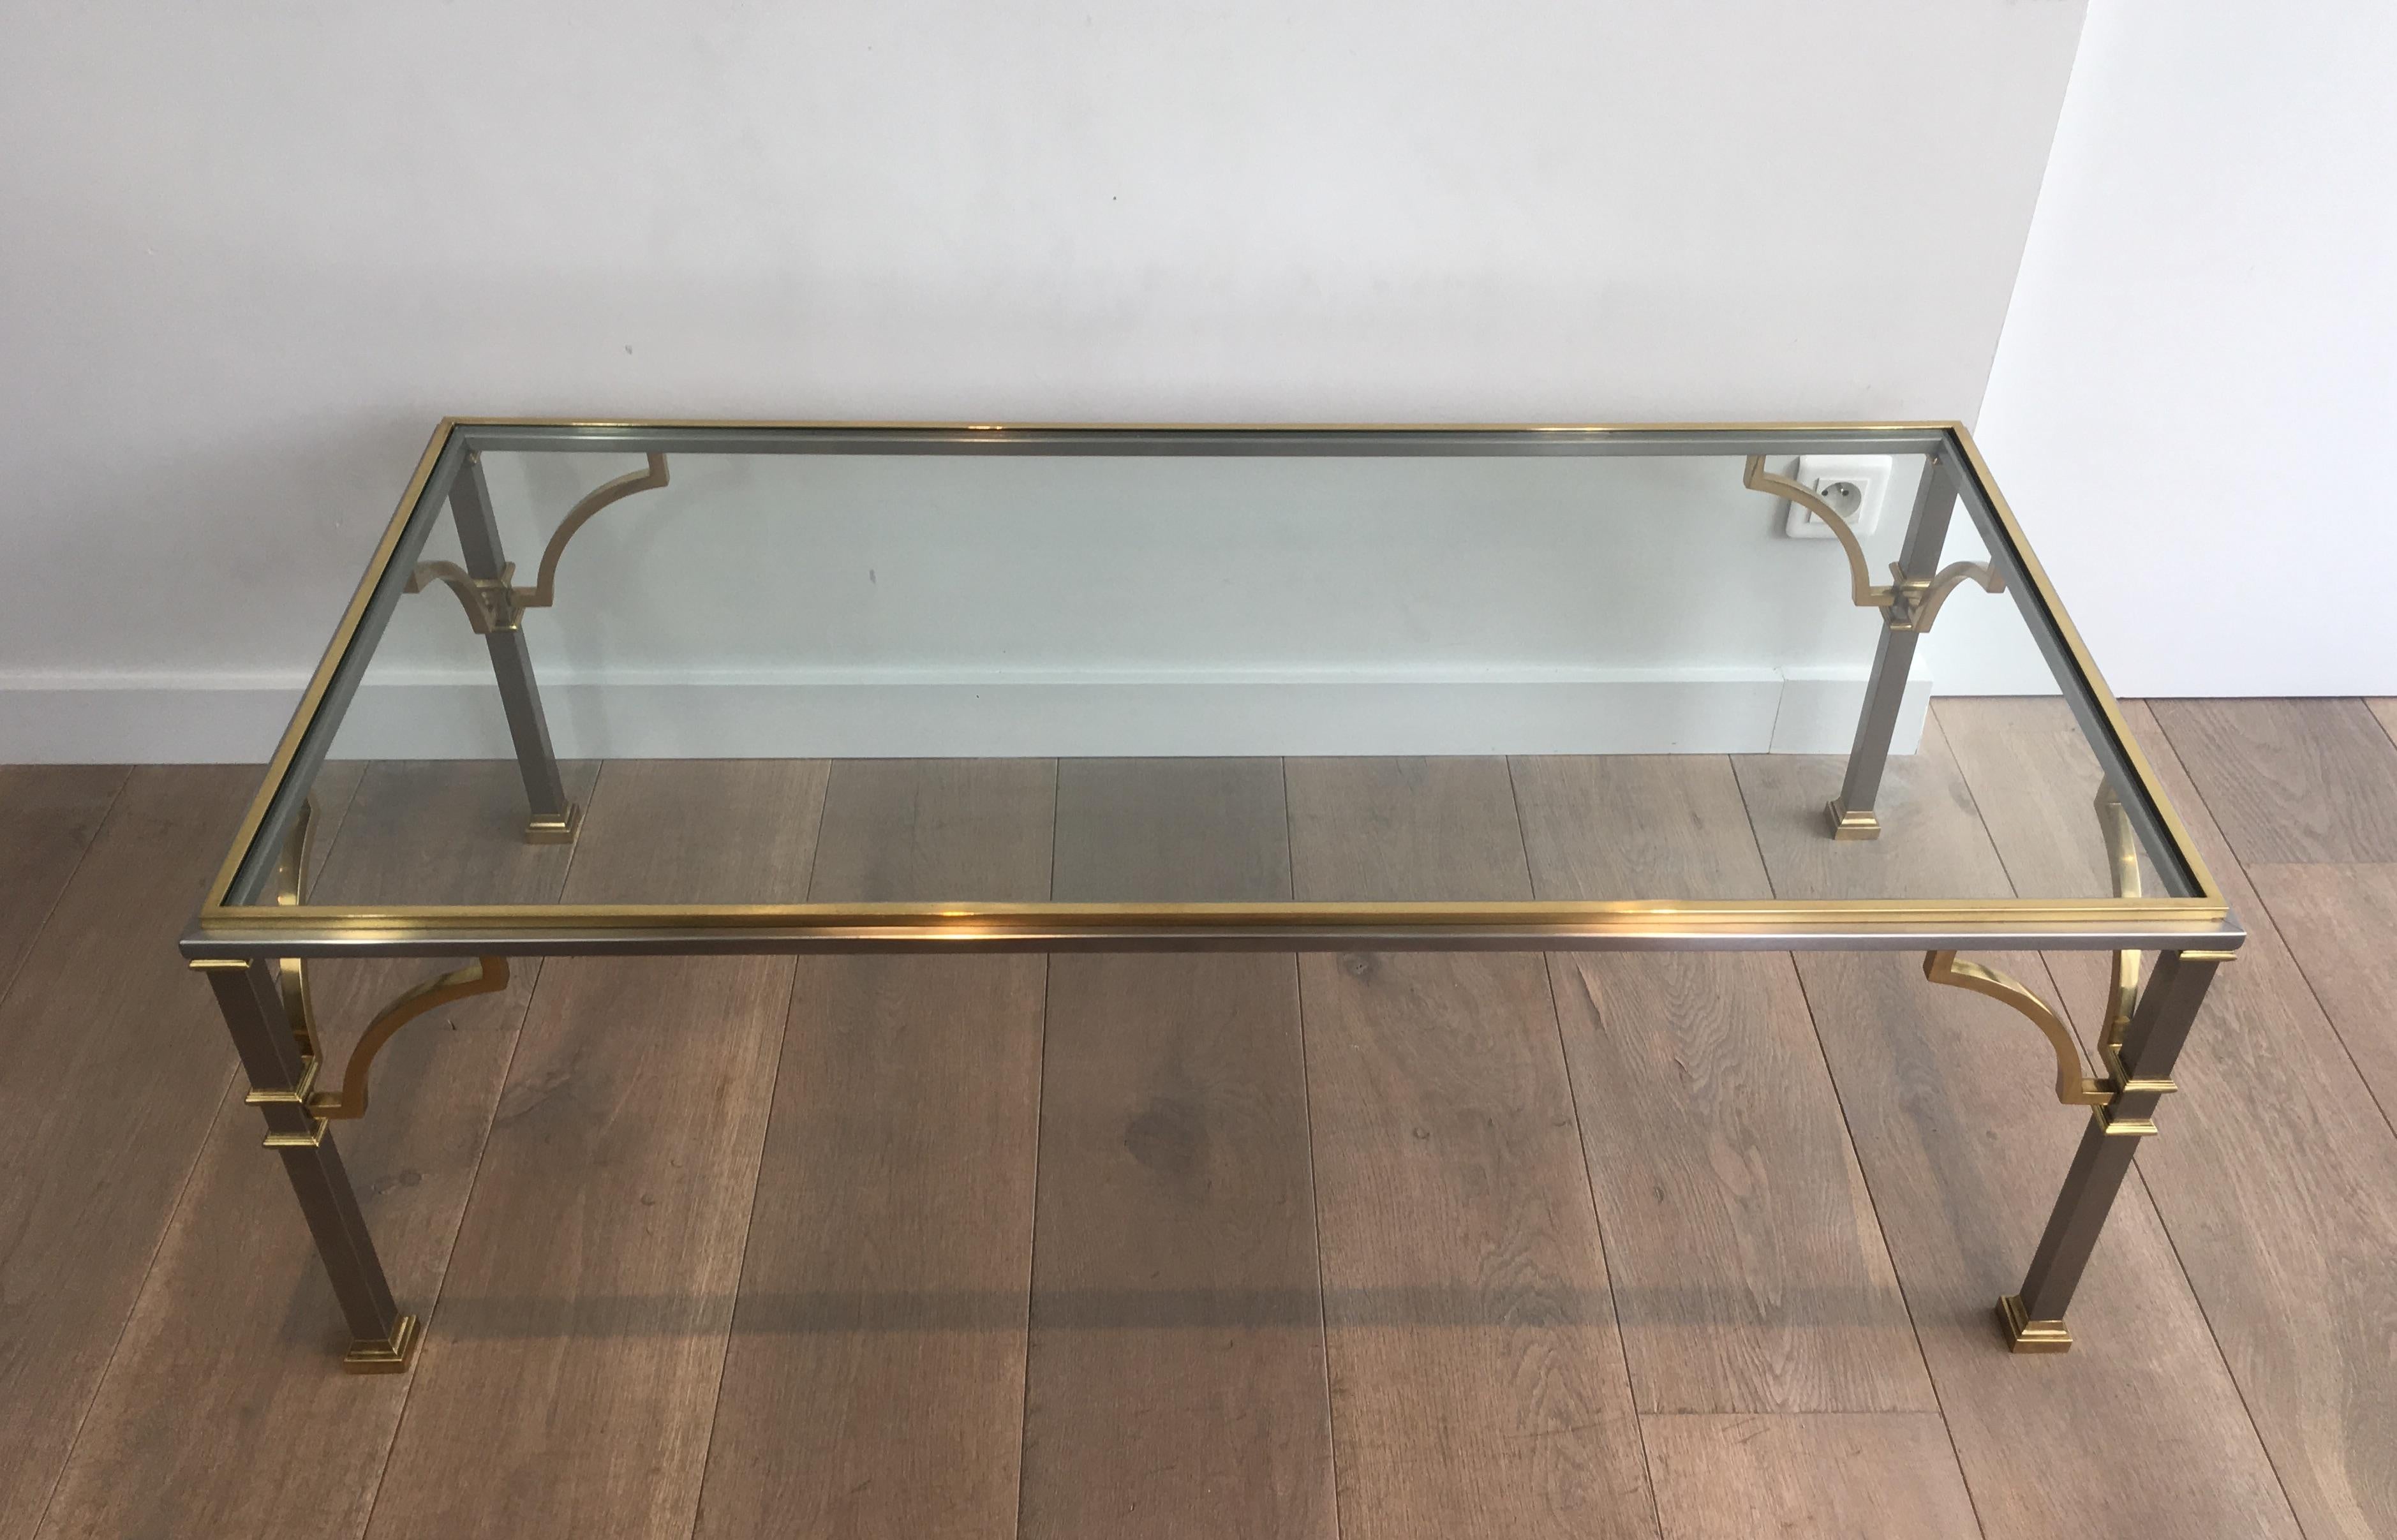 This neoclassical coffee table is made of brushed steel and brass with a glass shelf. This is a French work in the style of famous Maison Jansen designer, circa 1970.